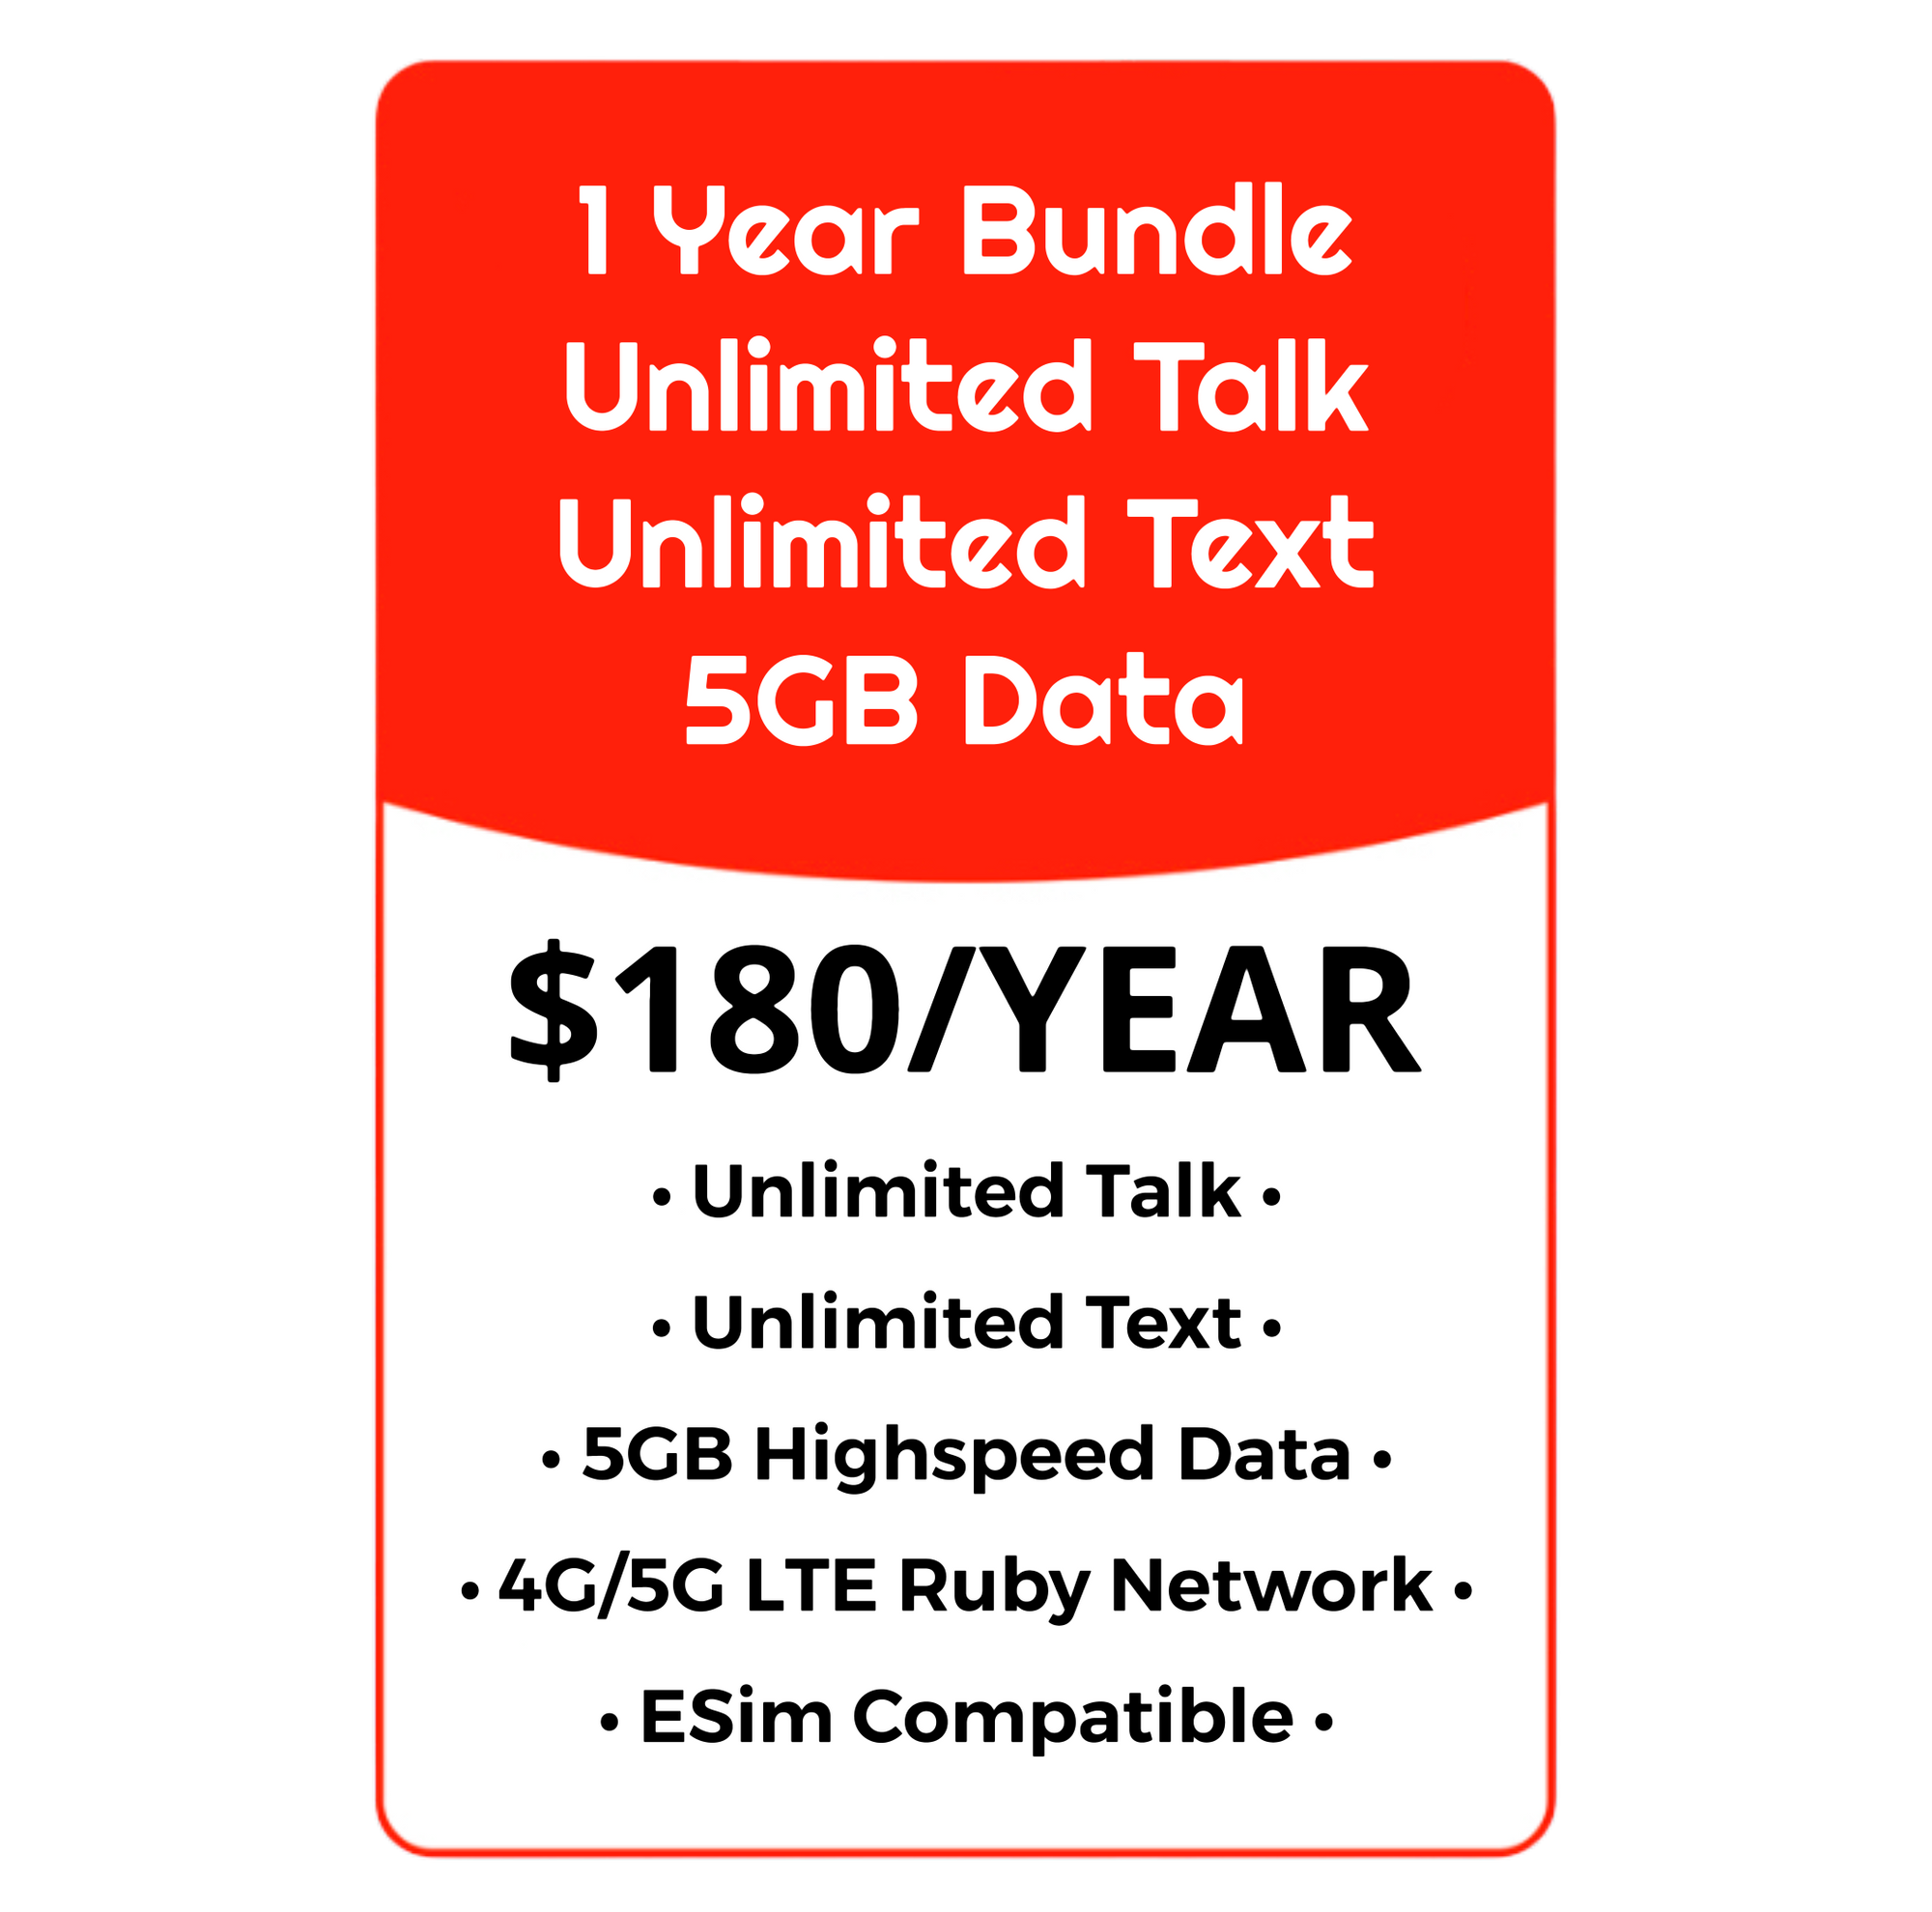 YEARLY BUNDLE - Unlimited Talk, Text & Data w/5GB High Speed - Ruby Network